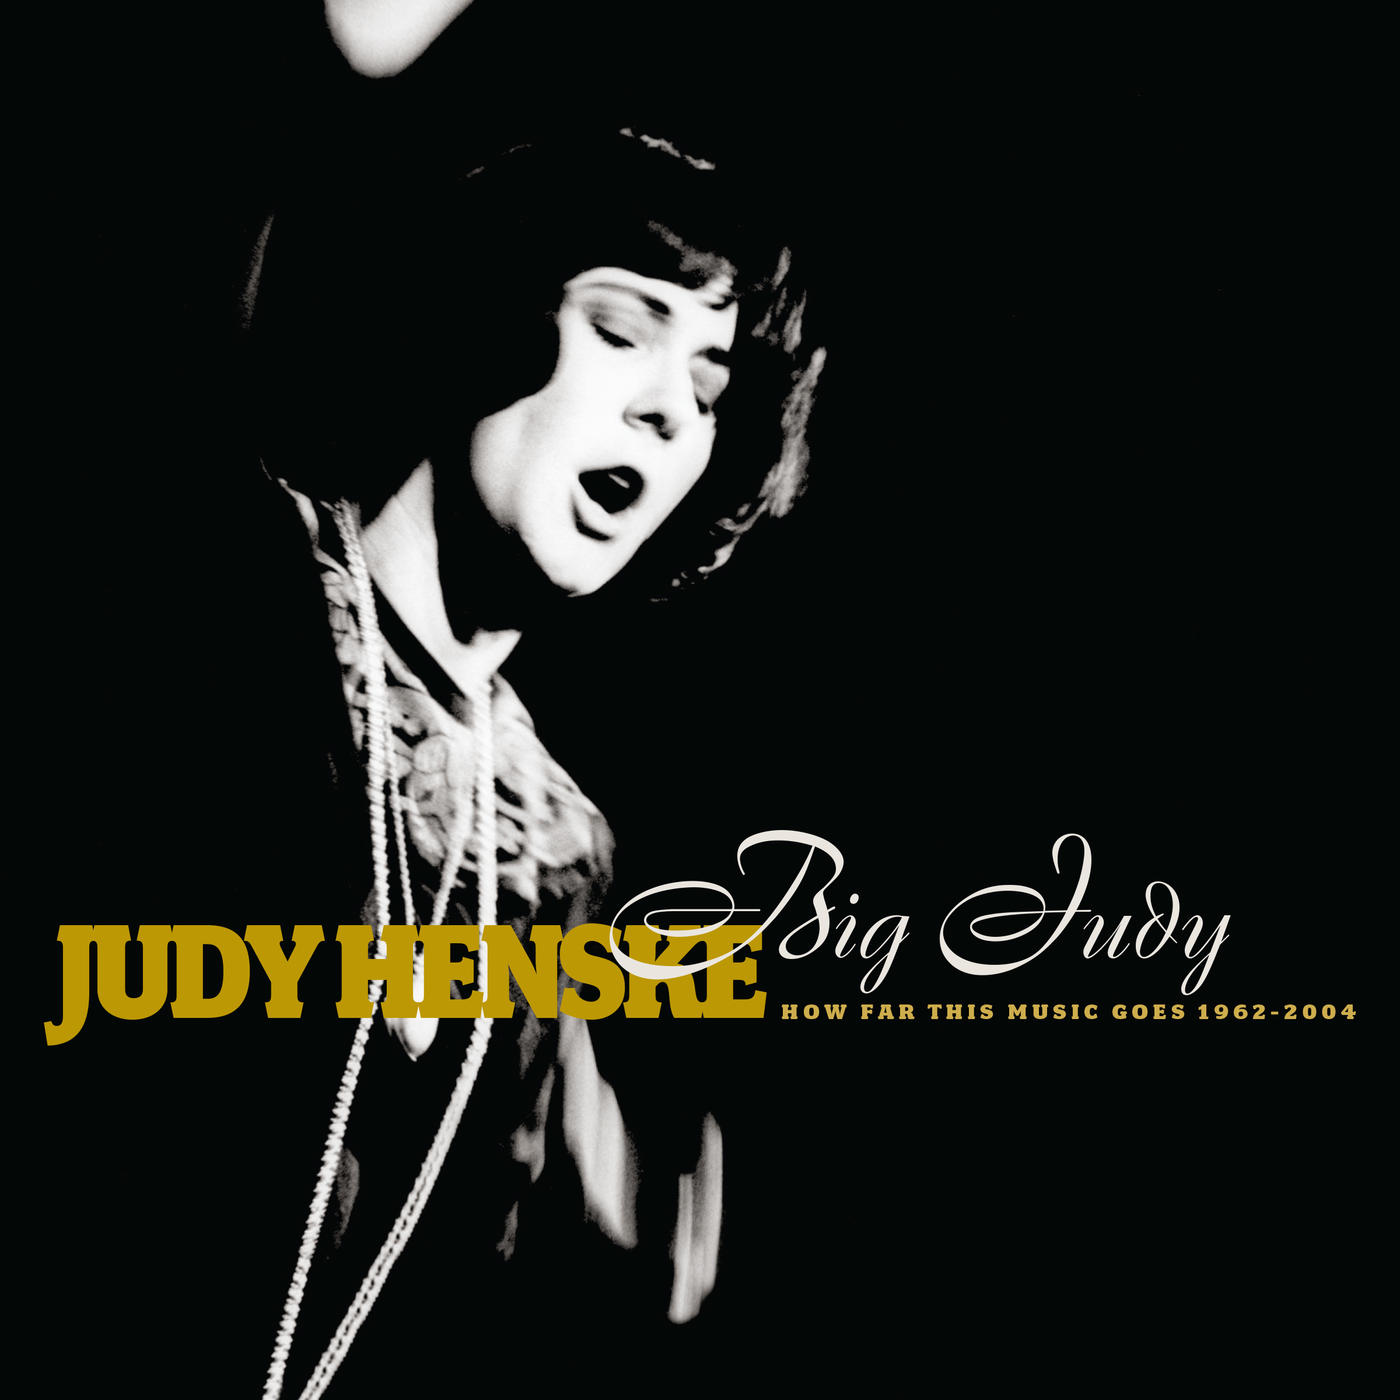 Big Judy: How Far This Music Goes 1962-2004